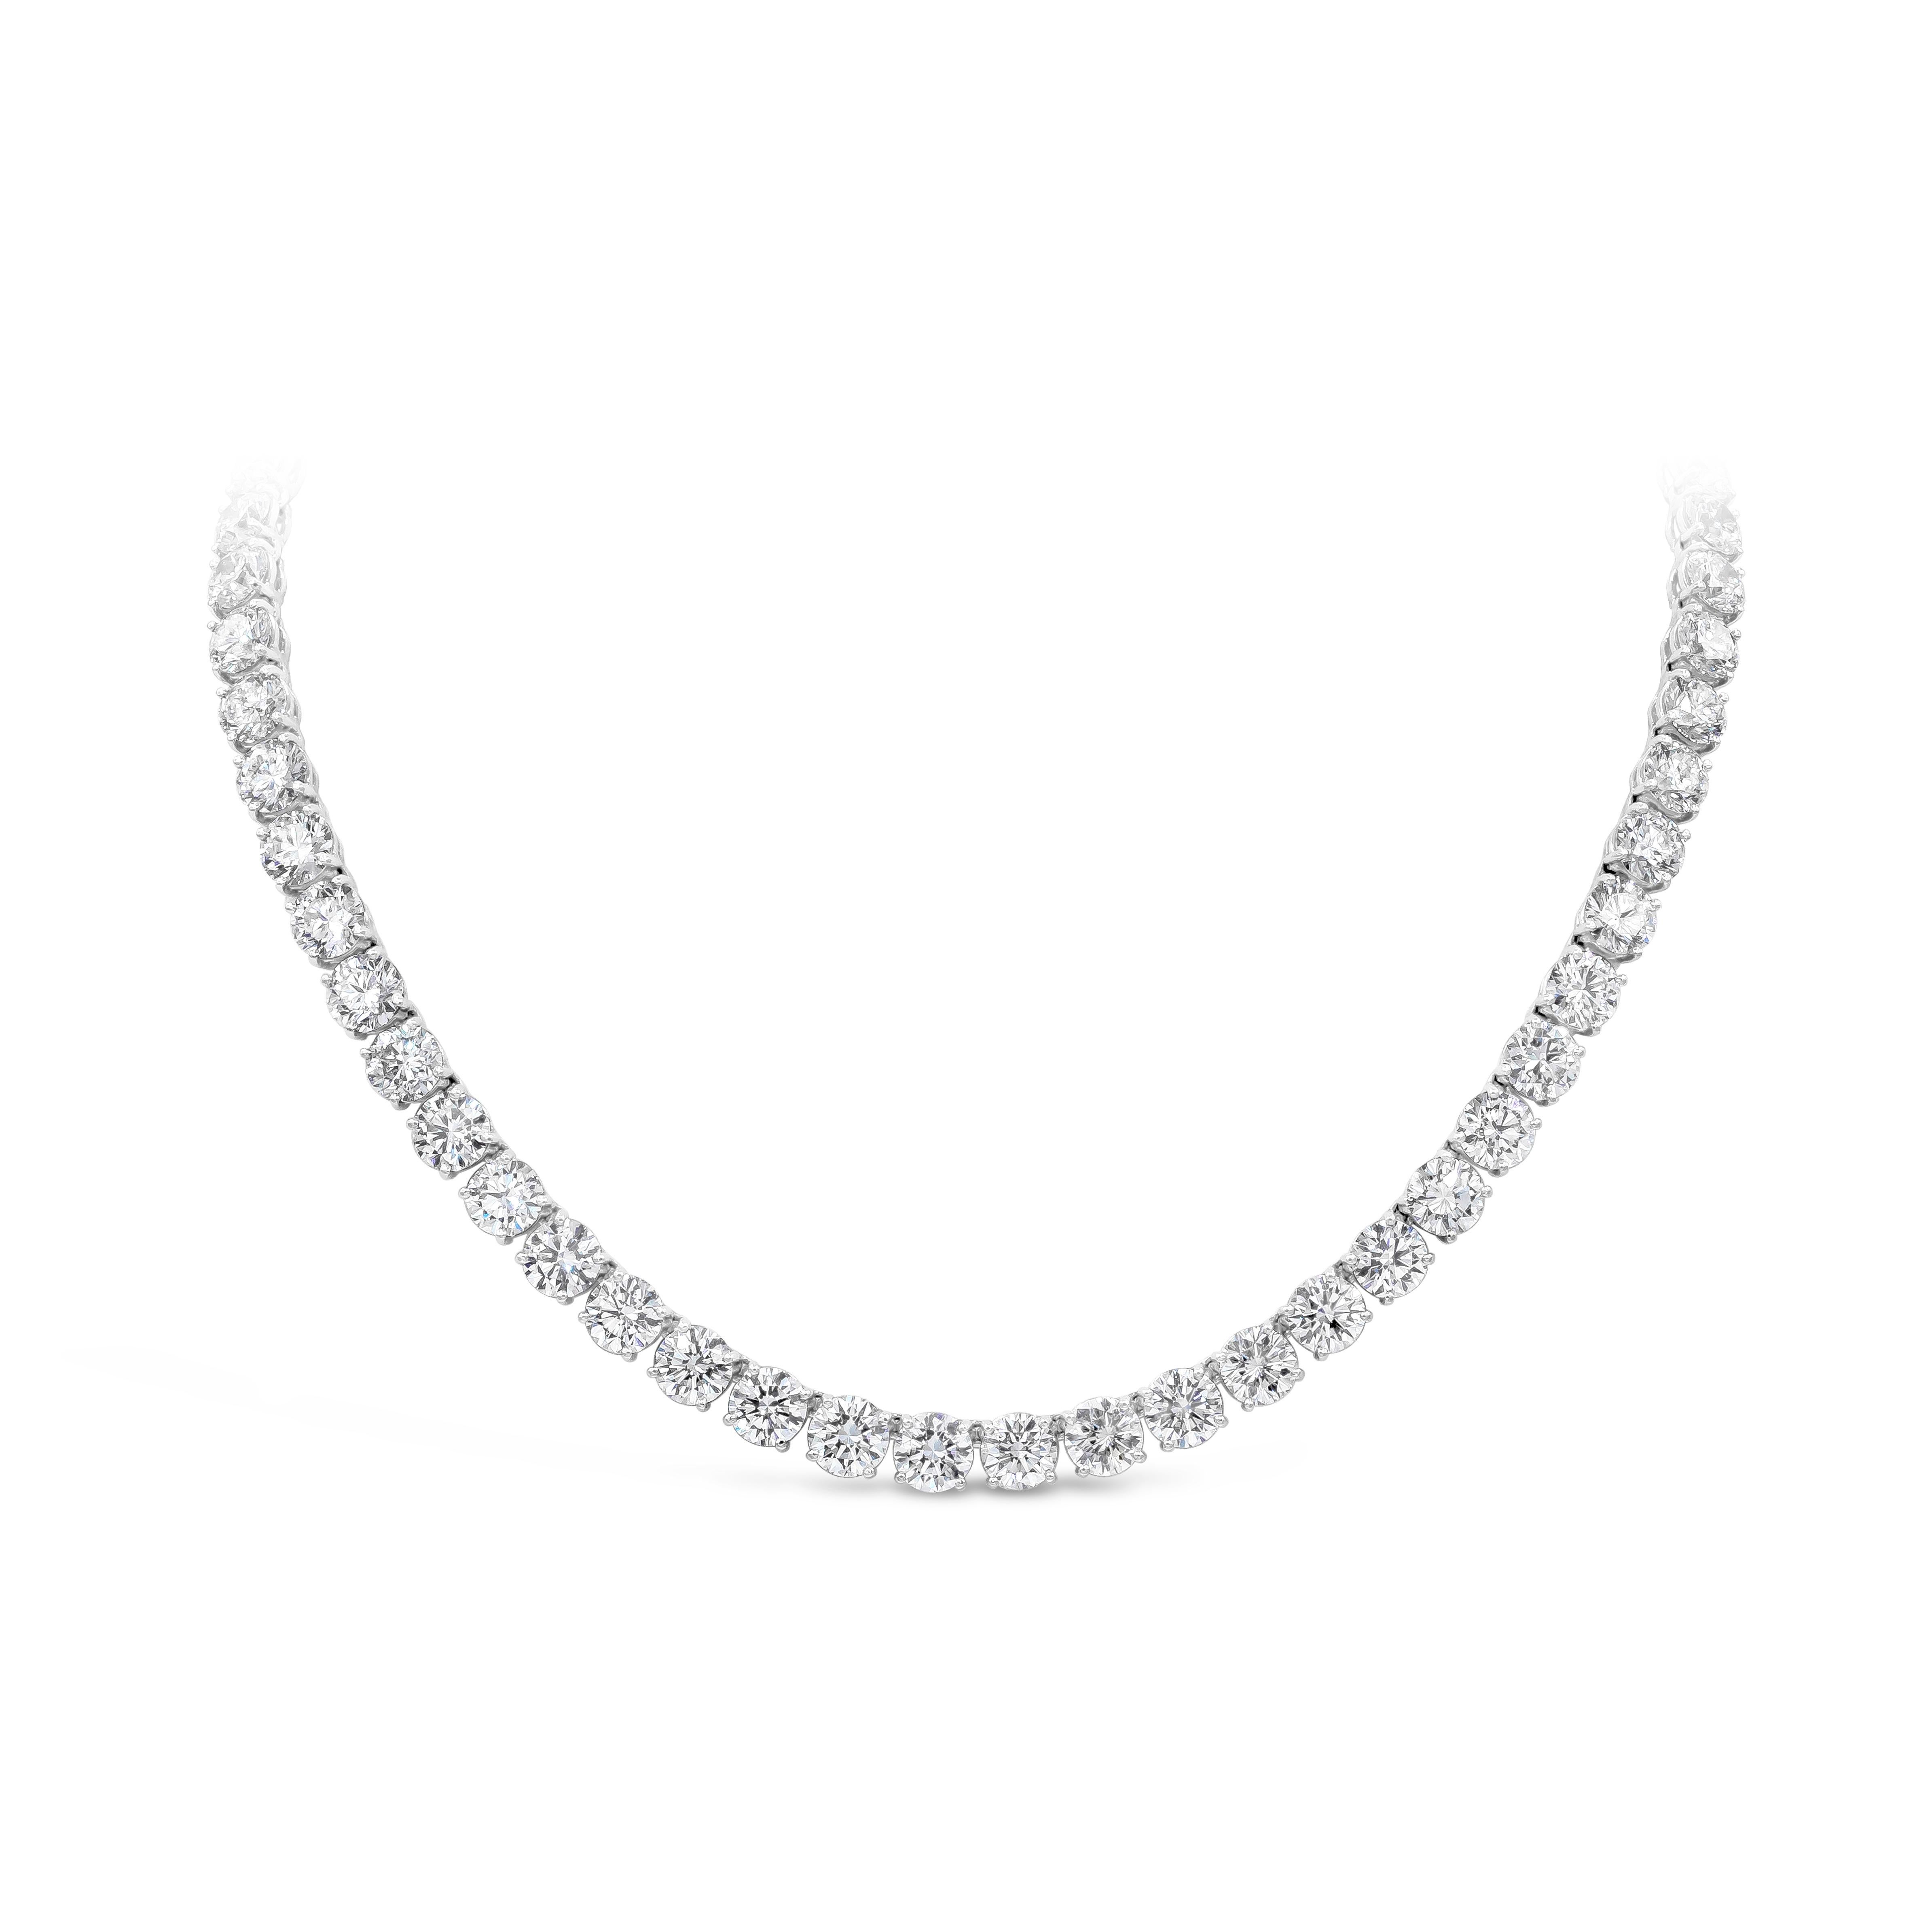 A brilliant and classic tennis necklace, showcasing a line of round cut diamonds set in polished platinum. Each diamond is GIA certified and weighs a stunning 60.62 carats total. The necklace is 16 inches in length.

Roman Malakov is a custom house,